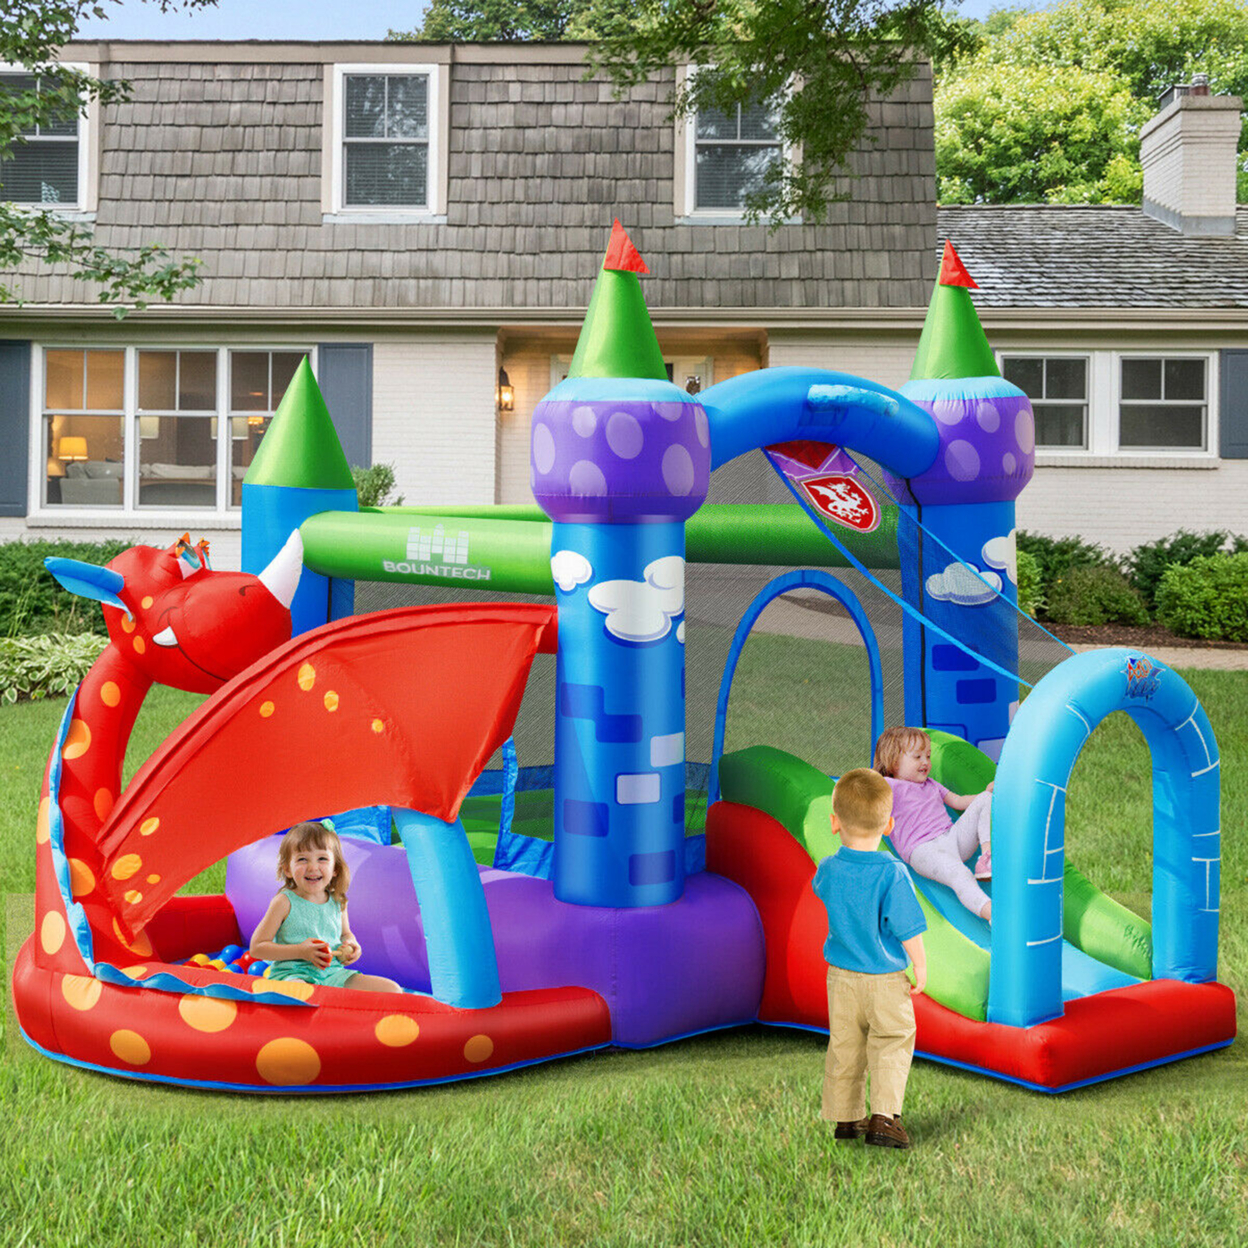 Kids Inflatable Bounce House Dragon Jumping Slide Bouncer Castle W/ 750W Blower